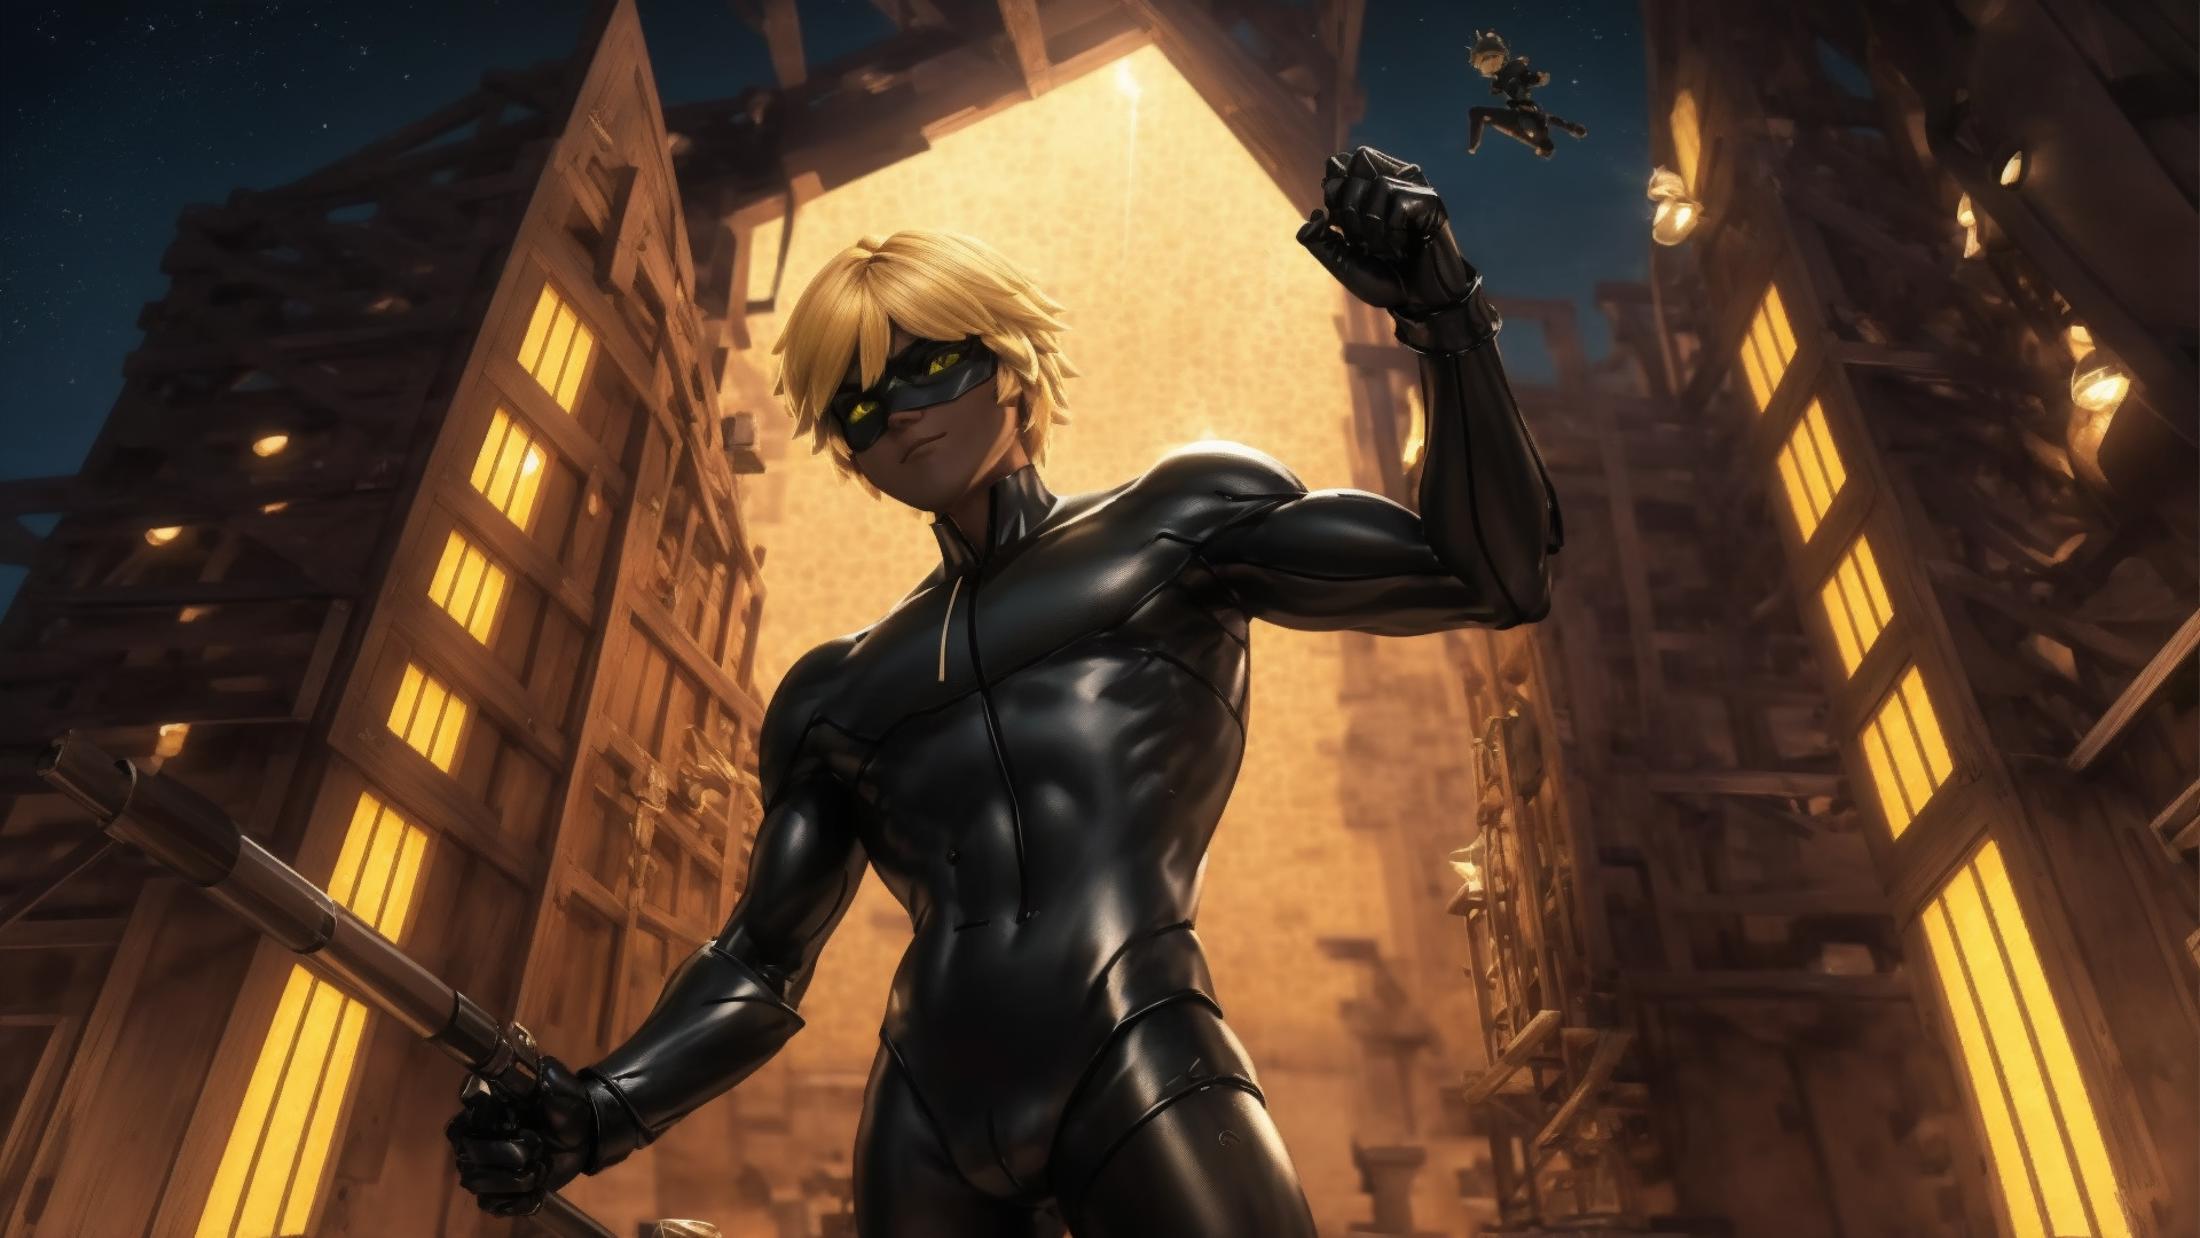 Miraculous Cat Noir image by Jcaldwell